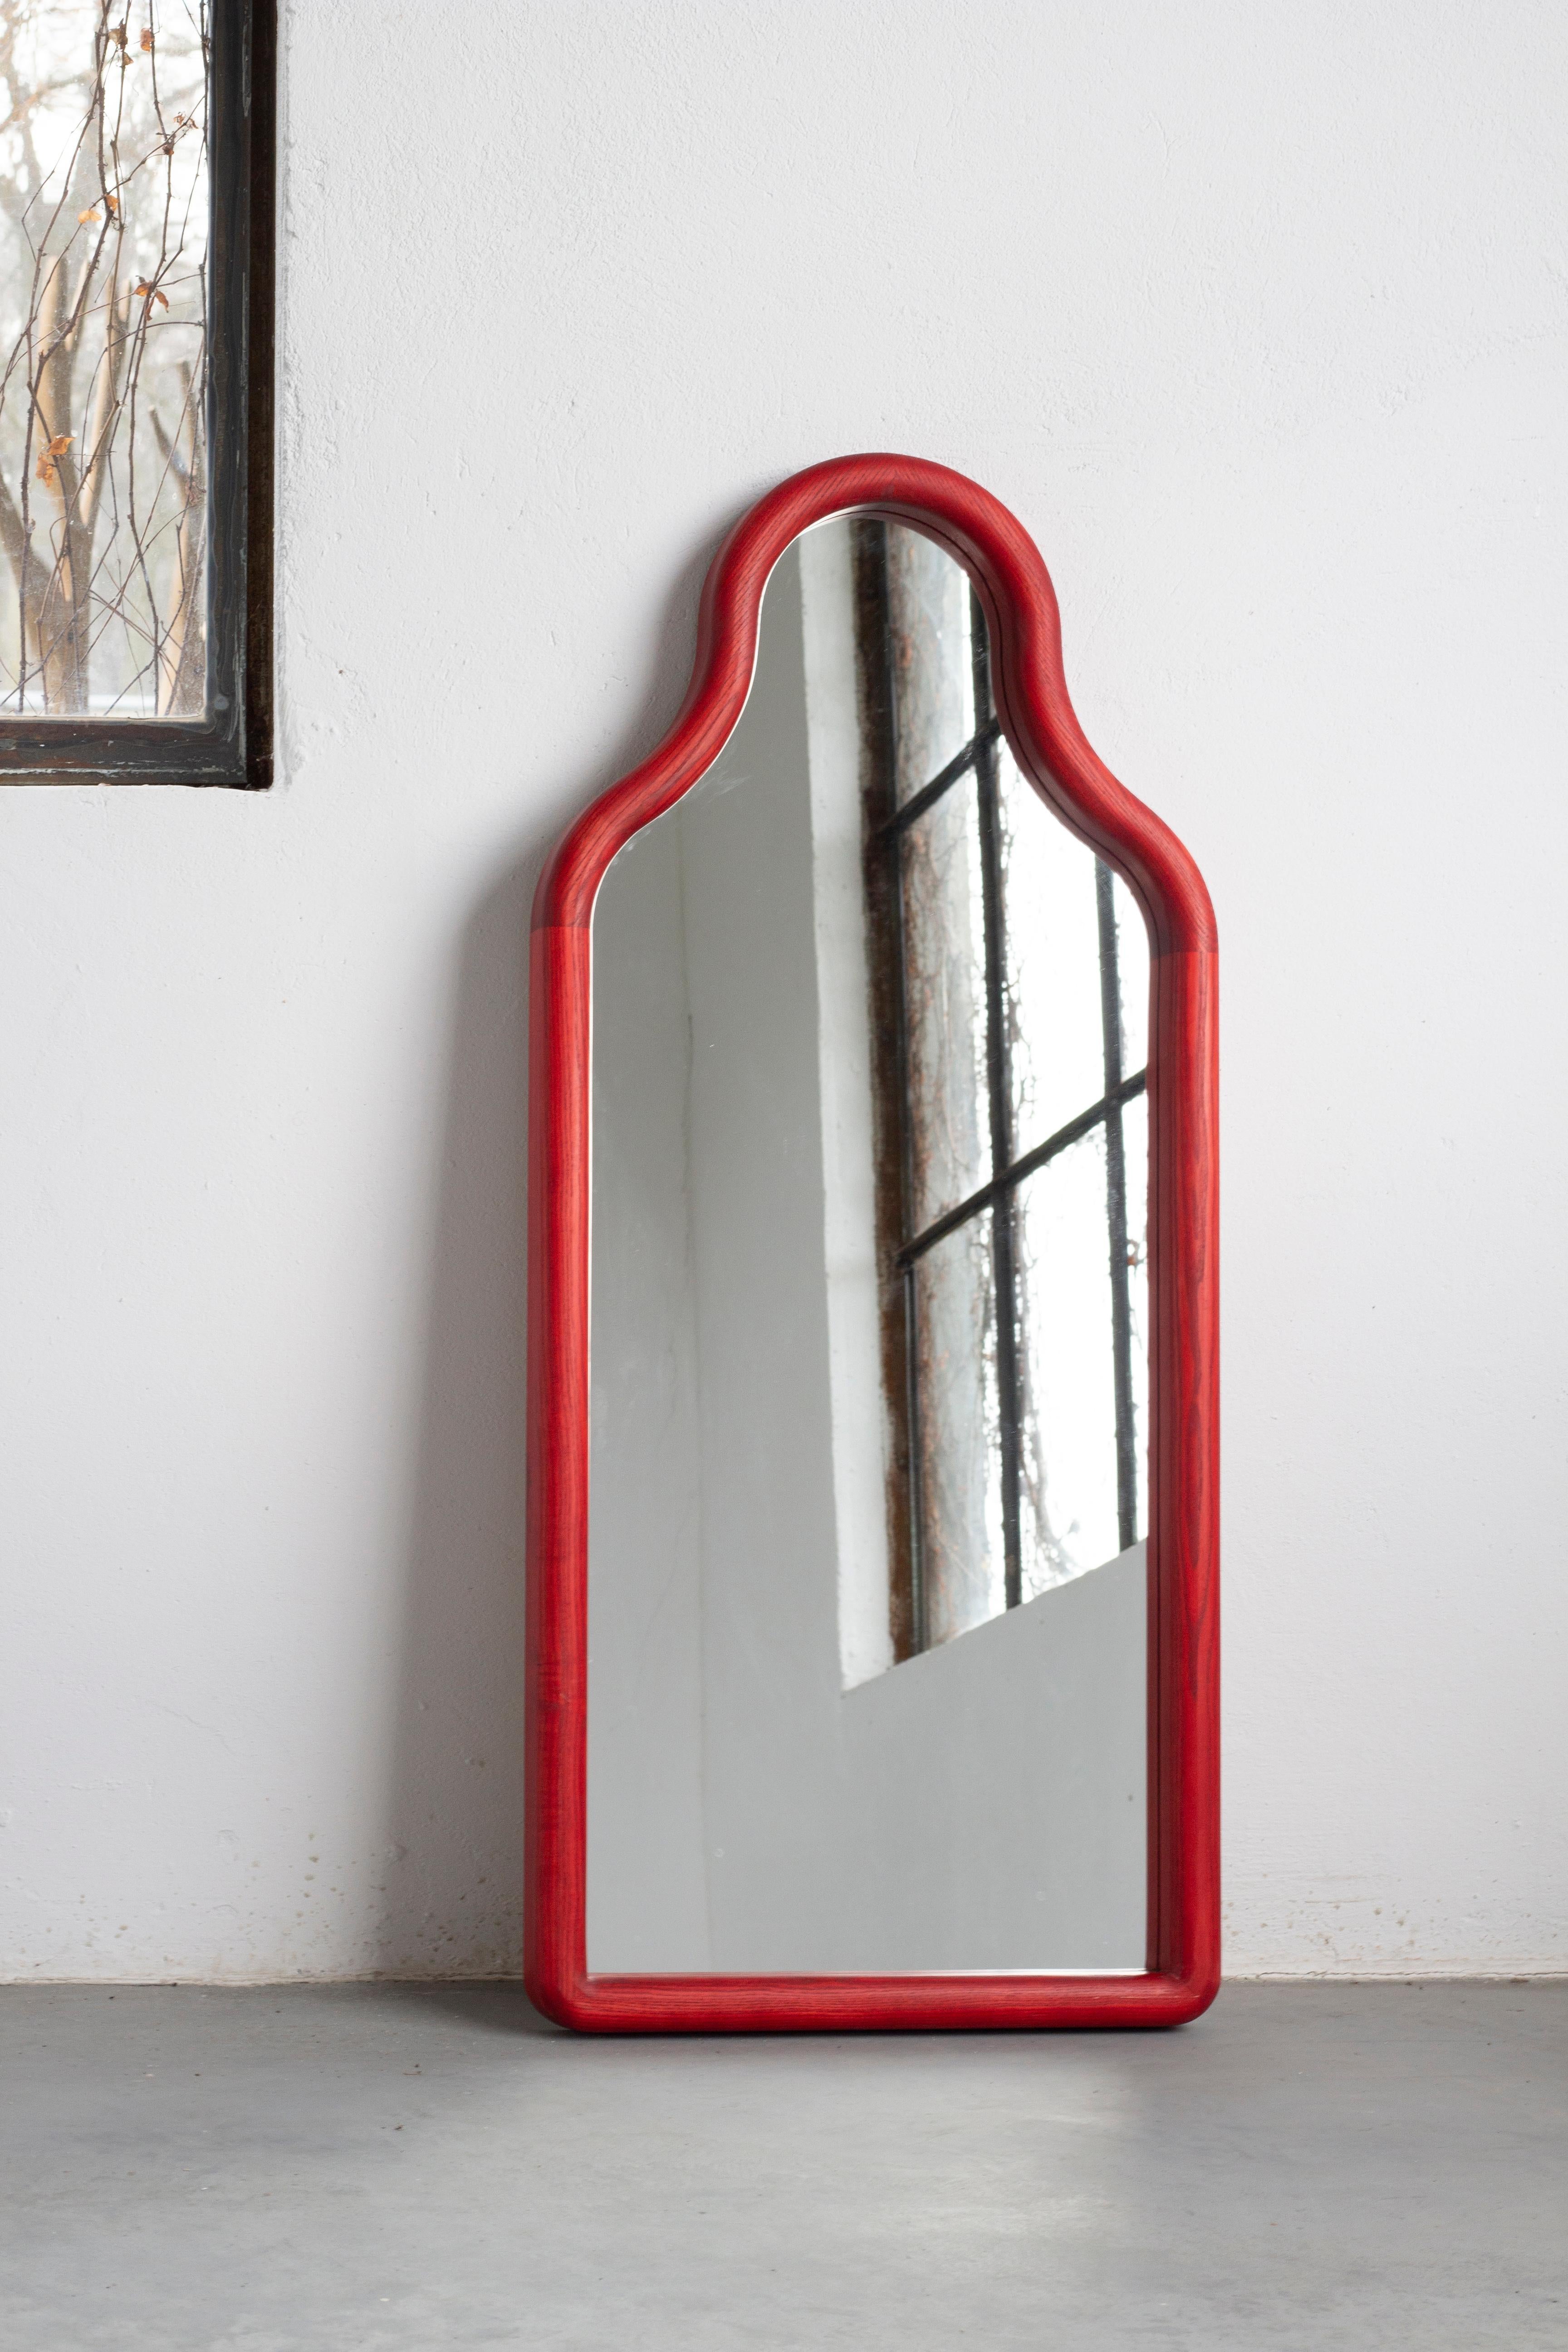 TRN M Floor mirror
Signed by Pani Jurek

Dimensions: H120 x 61,5 x 5
Materials: Solid ash wood, hand stained
Colors: red, blue, green, natural

_________________________________

Pani Jurek is a Polish design studio founded by artist and designer